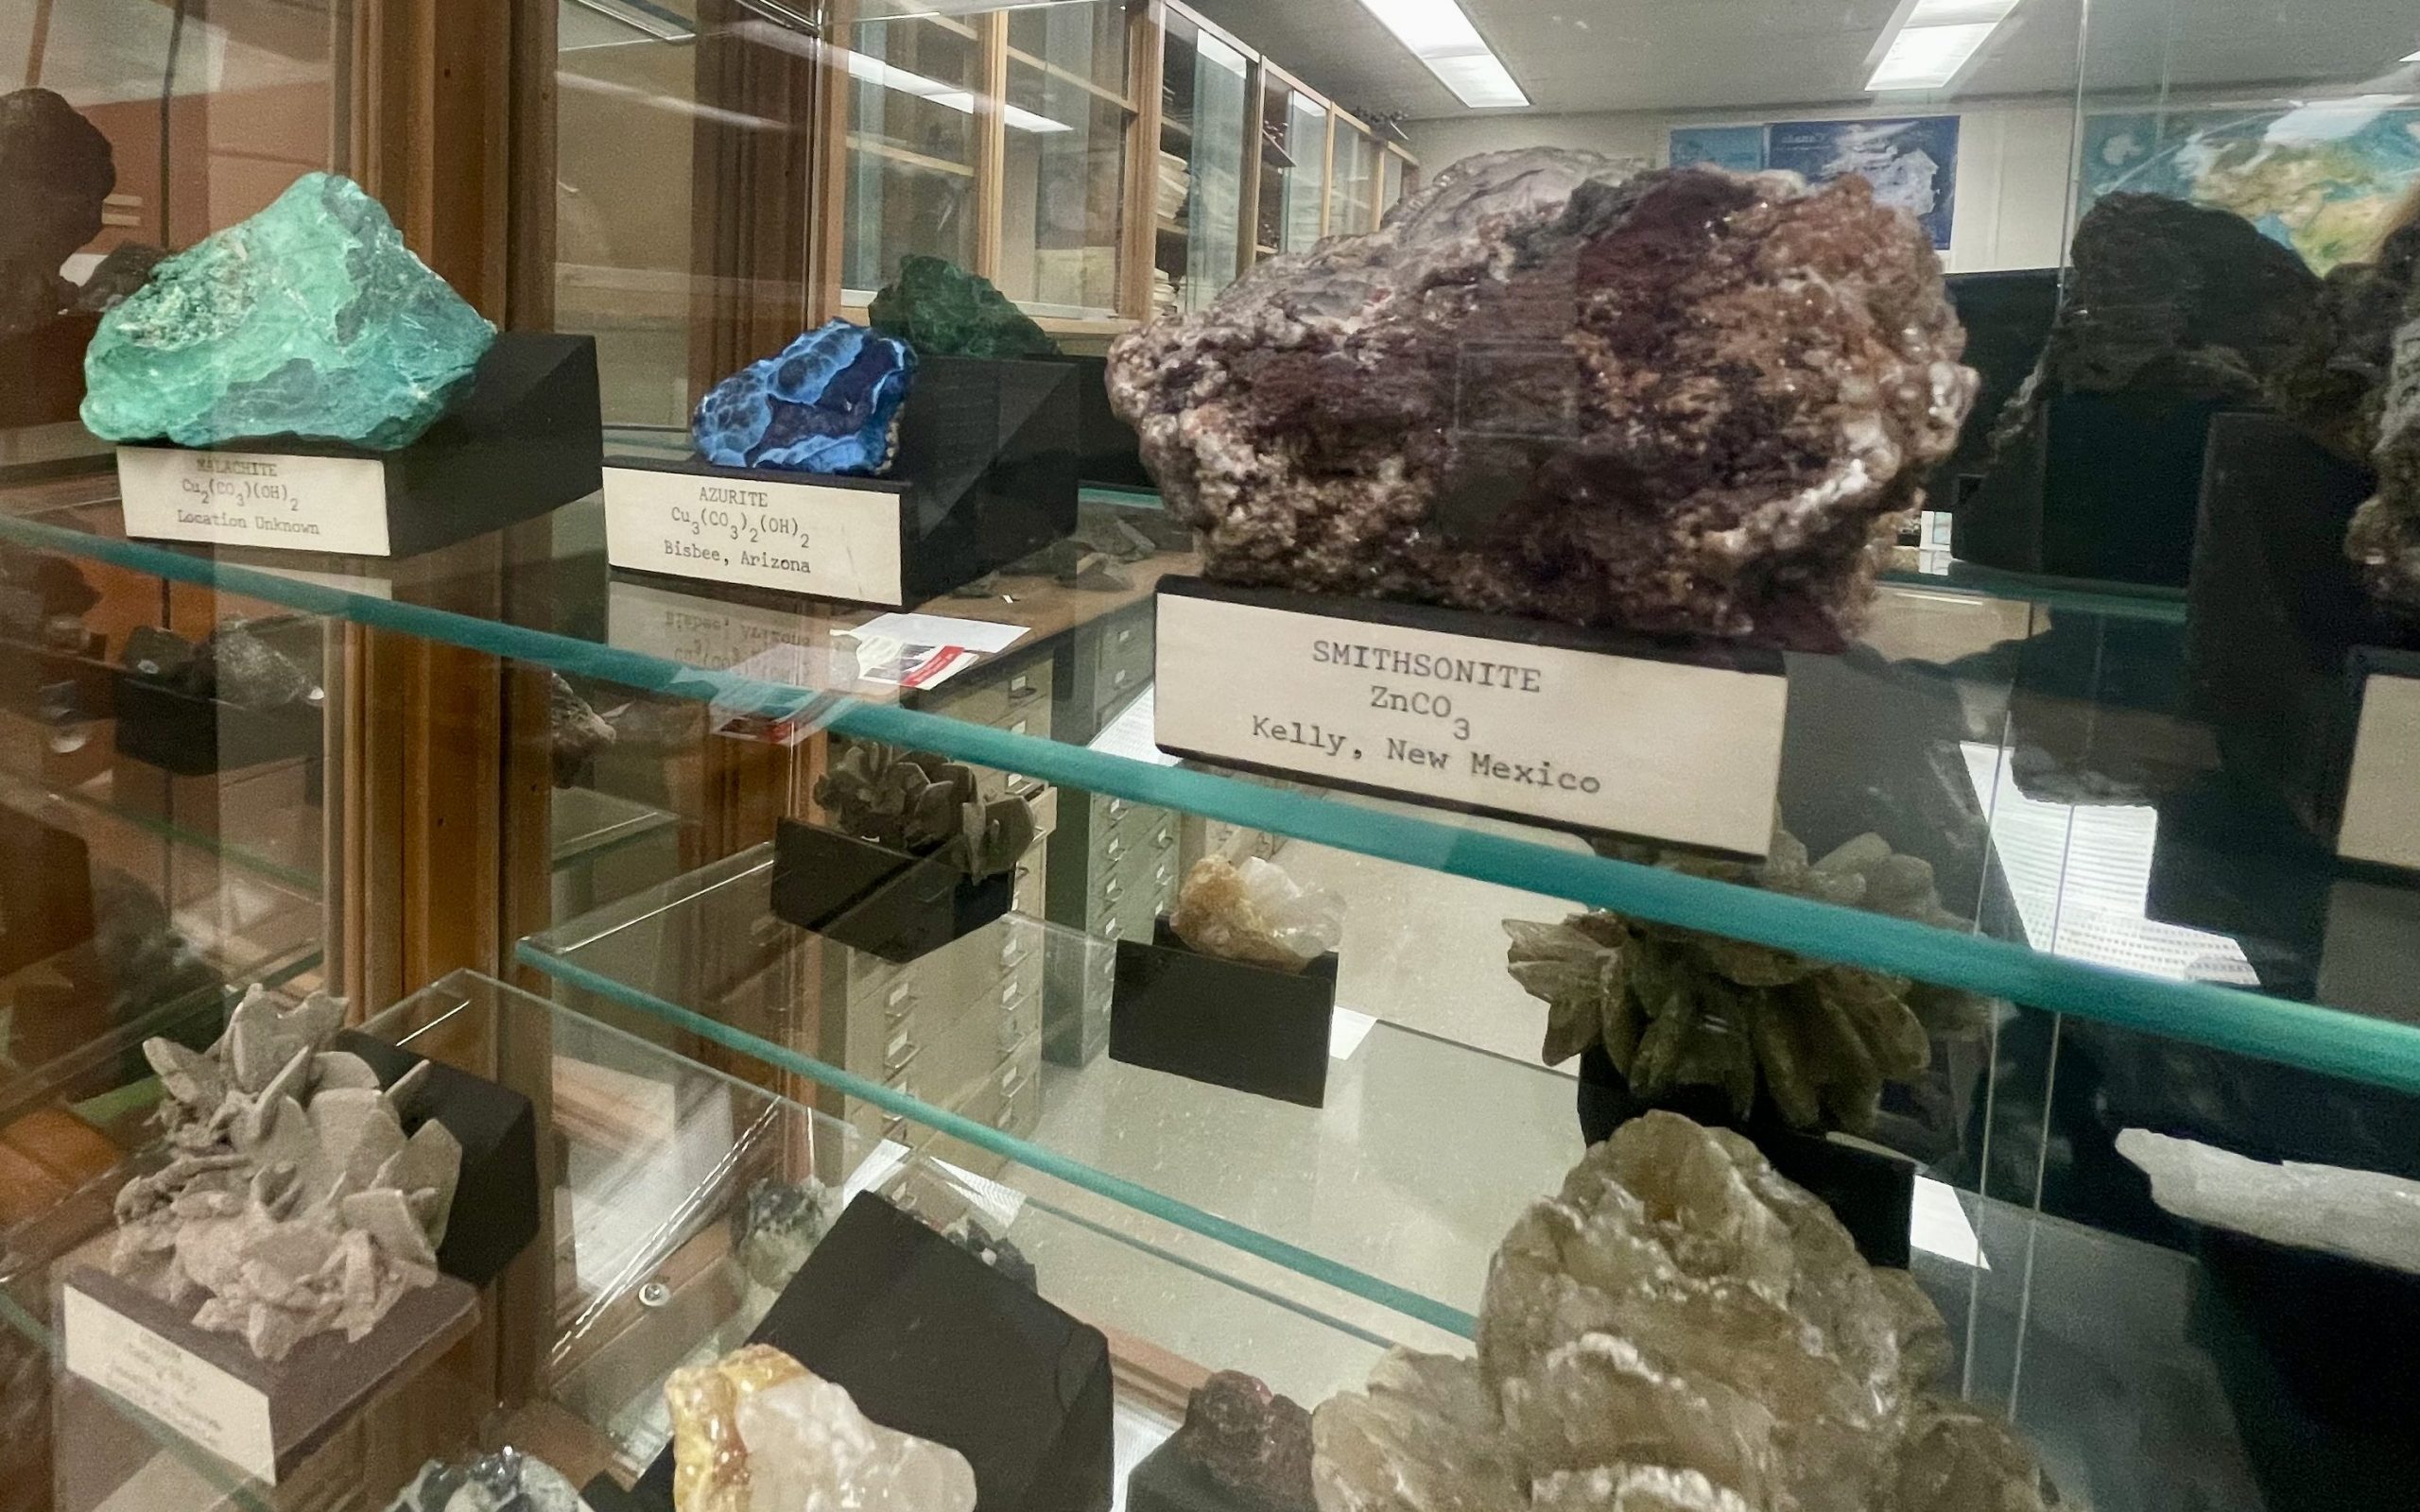 A collection of colourful rocks in a display case